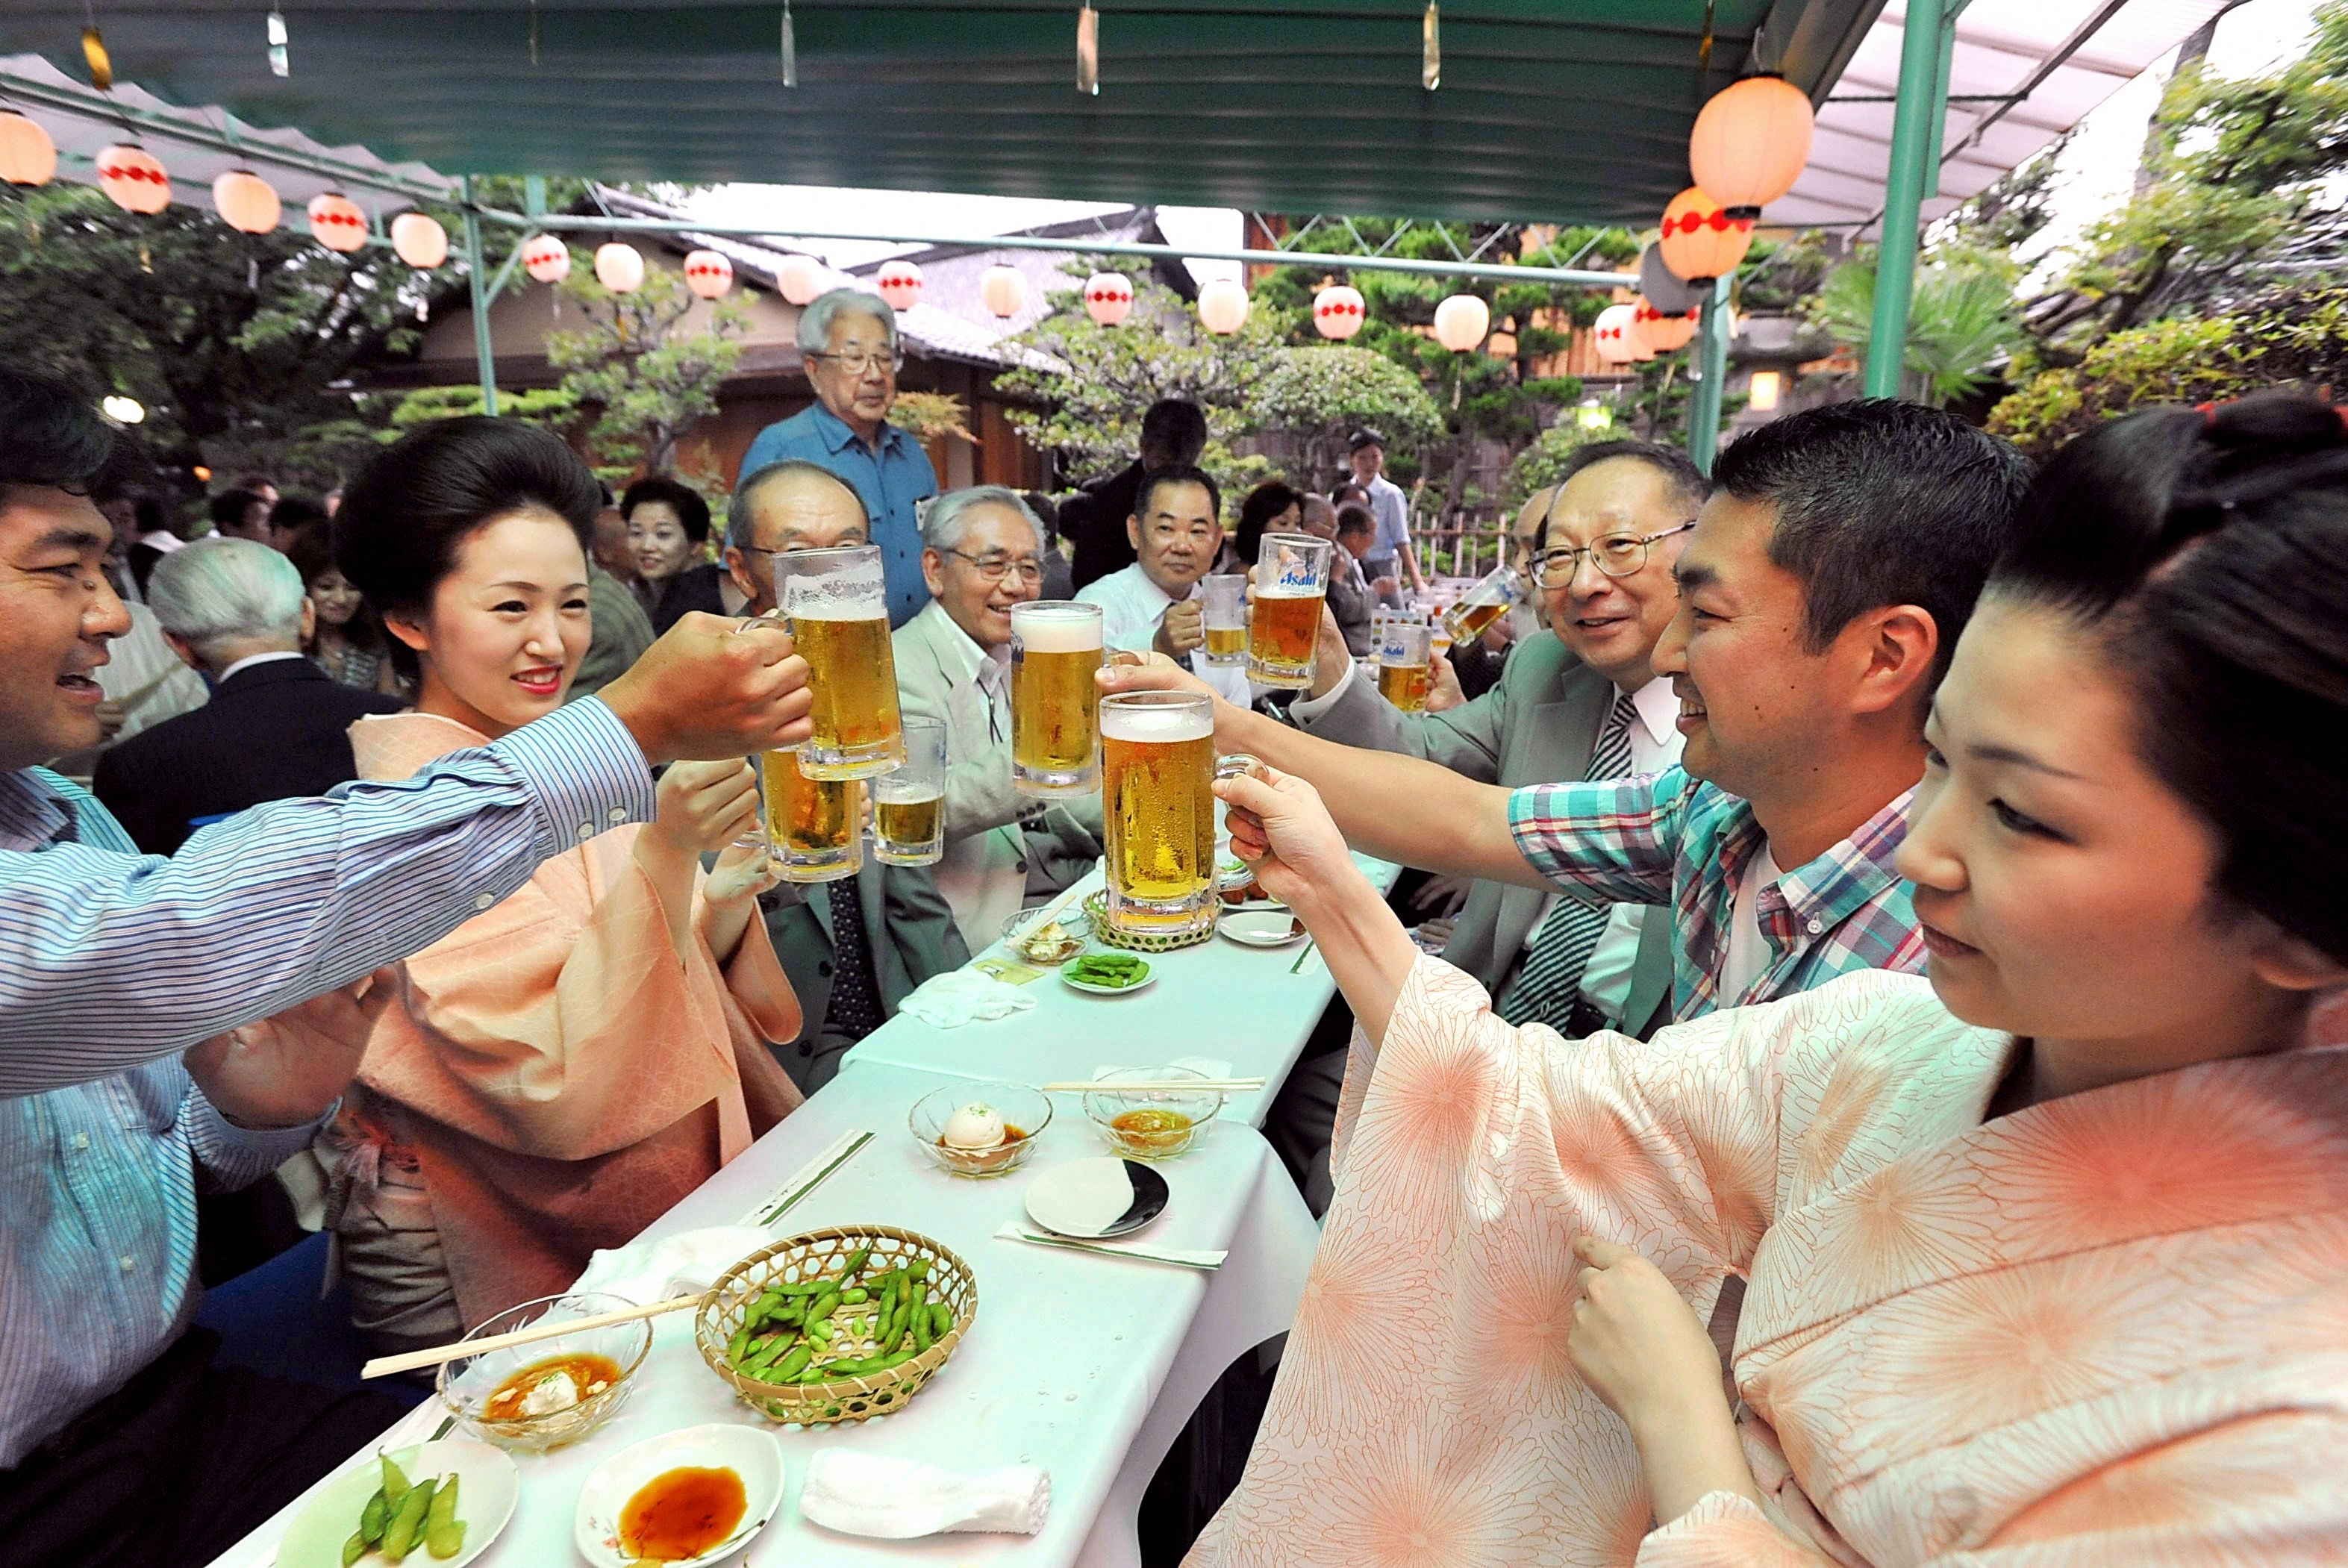 A narrow table with a white cloth and small dishes of food sits between two rows of people, some men in button-down shirts and some women in light pink kimono, who are all hoisting tall steins of beer in a toast at the Kamishichiken Kaburenjo Theatre in Kytoo